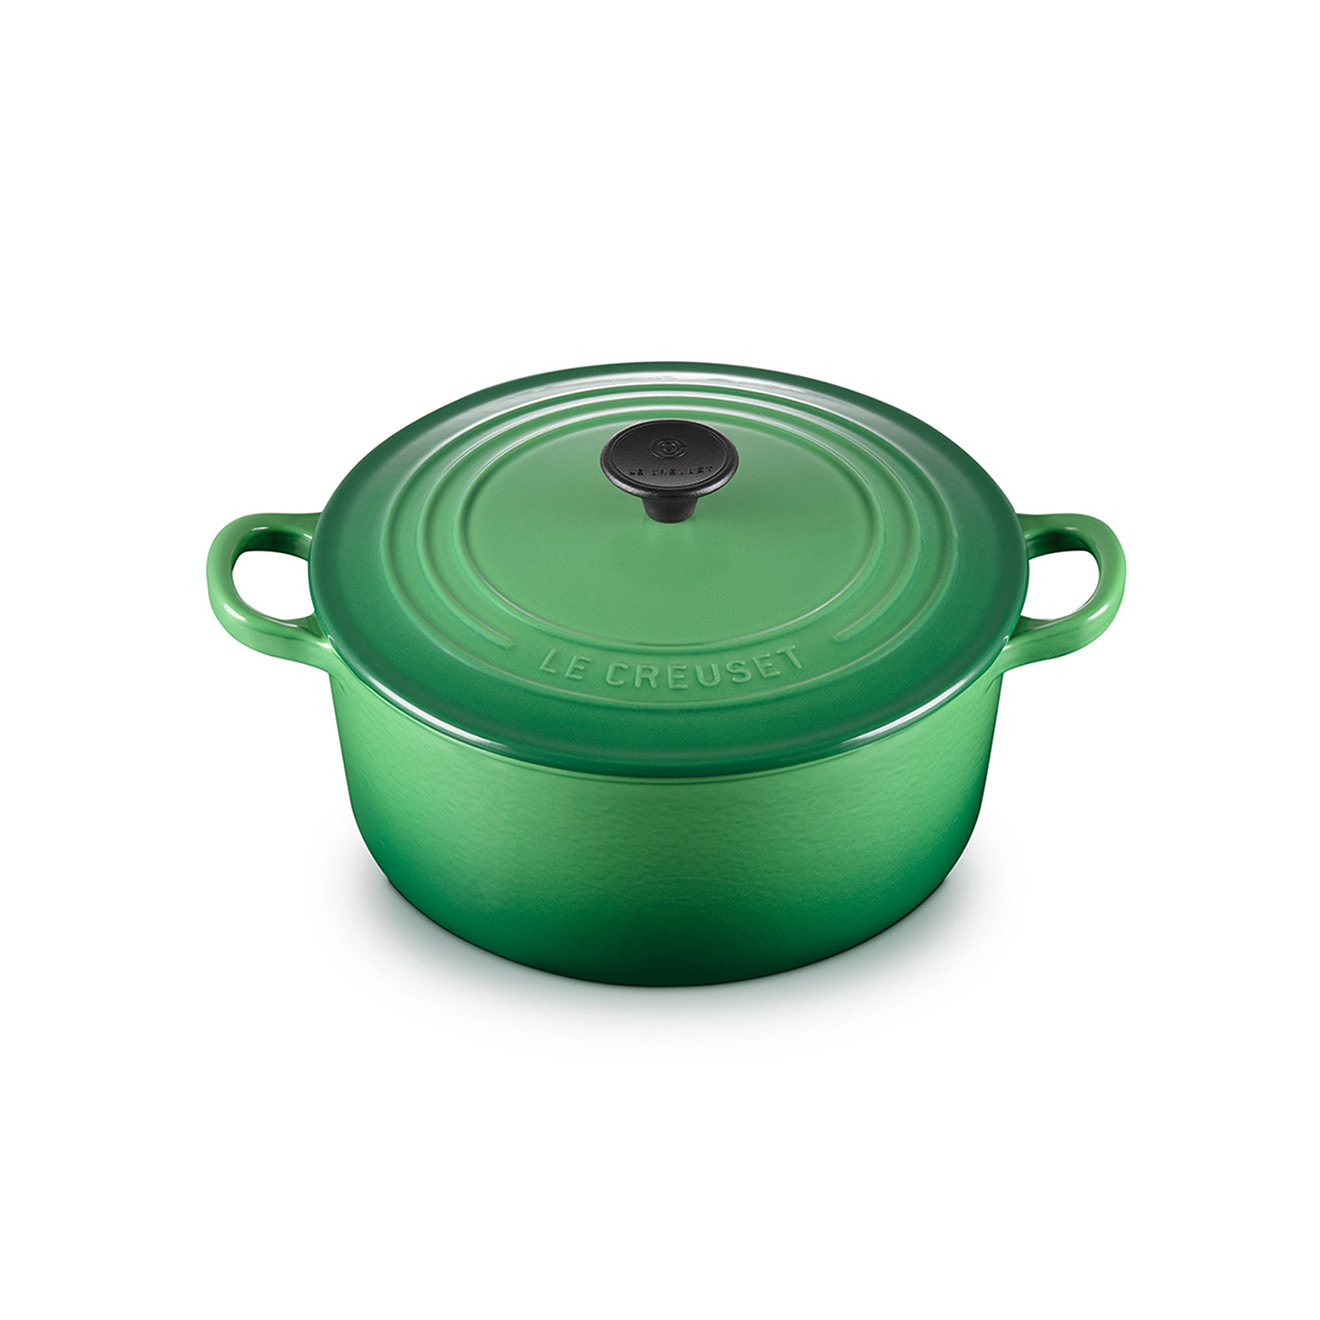 Tradition roaster, round; cast iron, 22cm, color Bamboo | Outlet price € 202,30 | RRP € 289